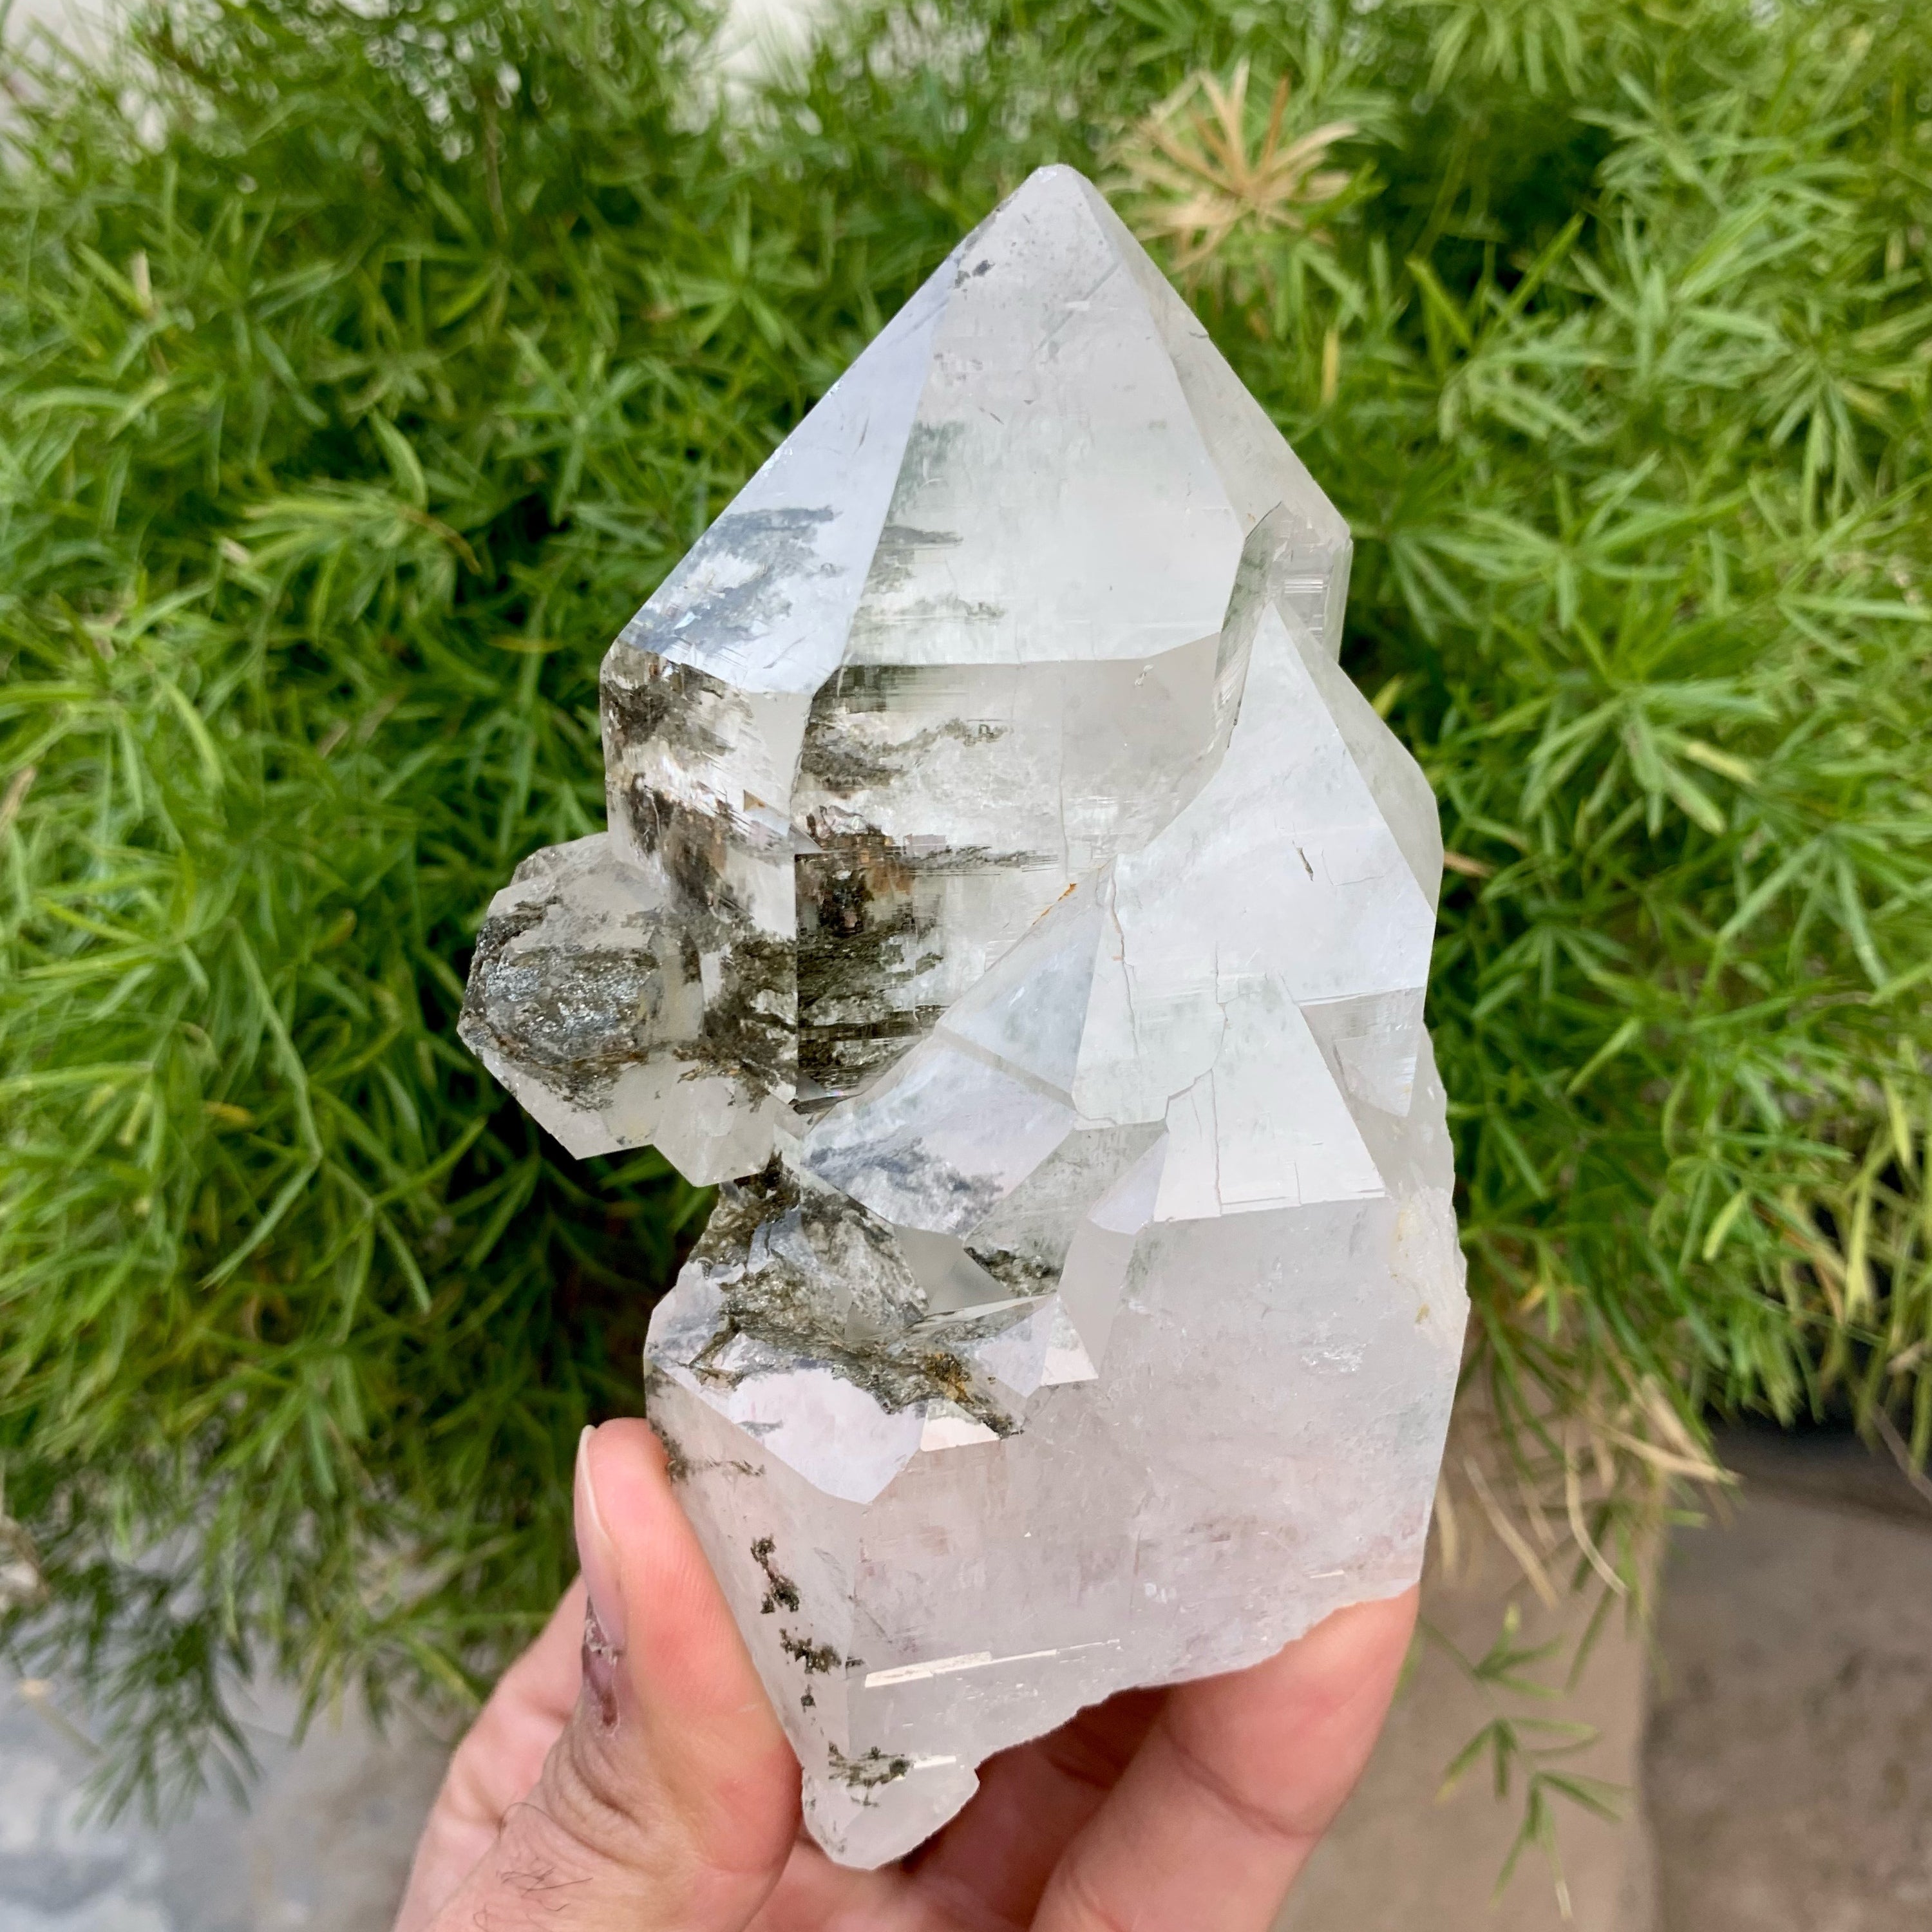 Lovely Himalayan Quality Quartz With Chlorite Inclusion